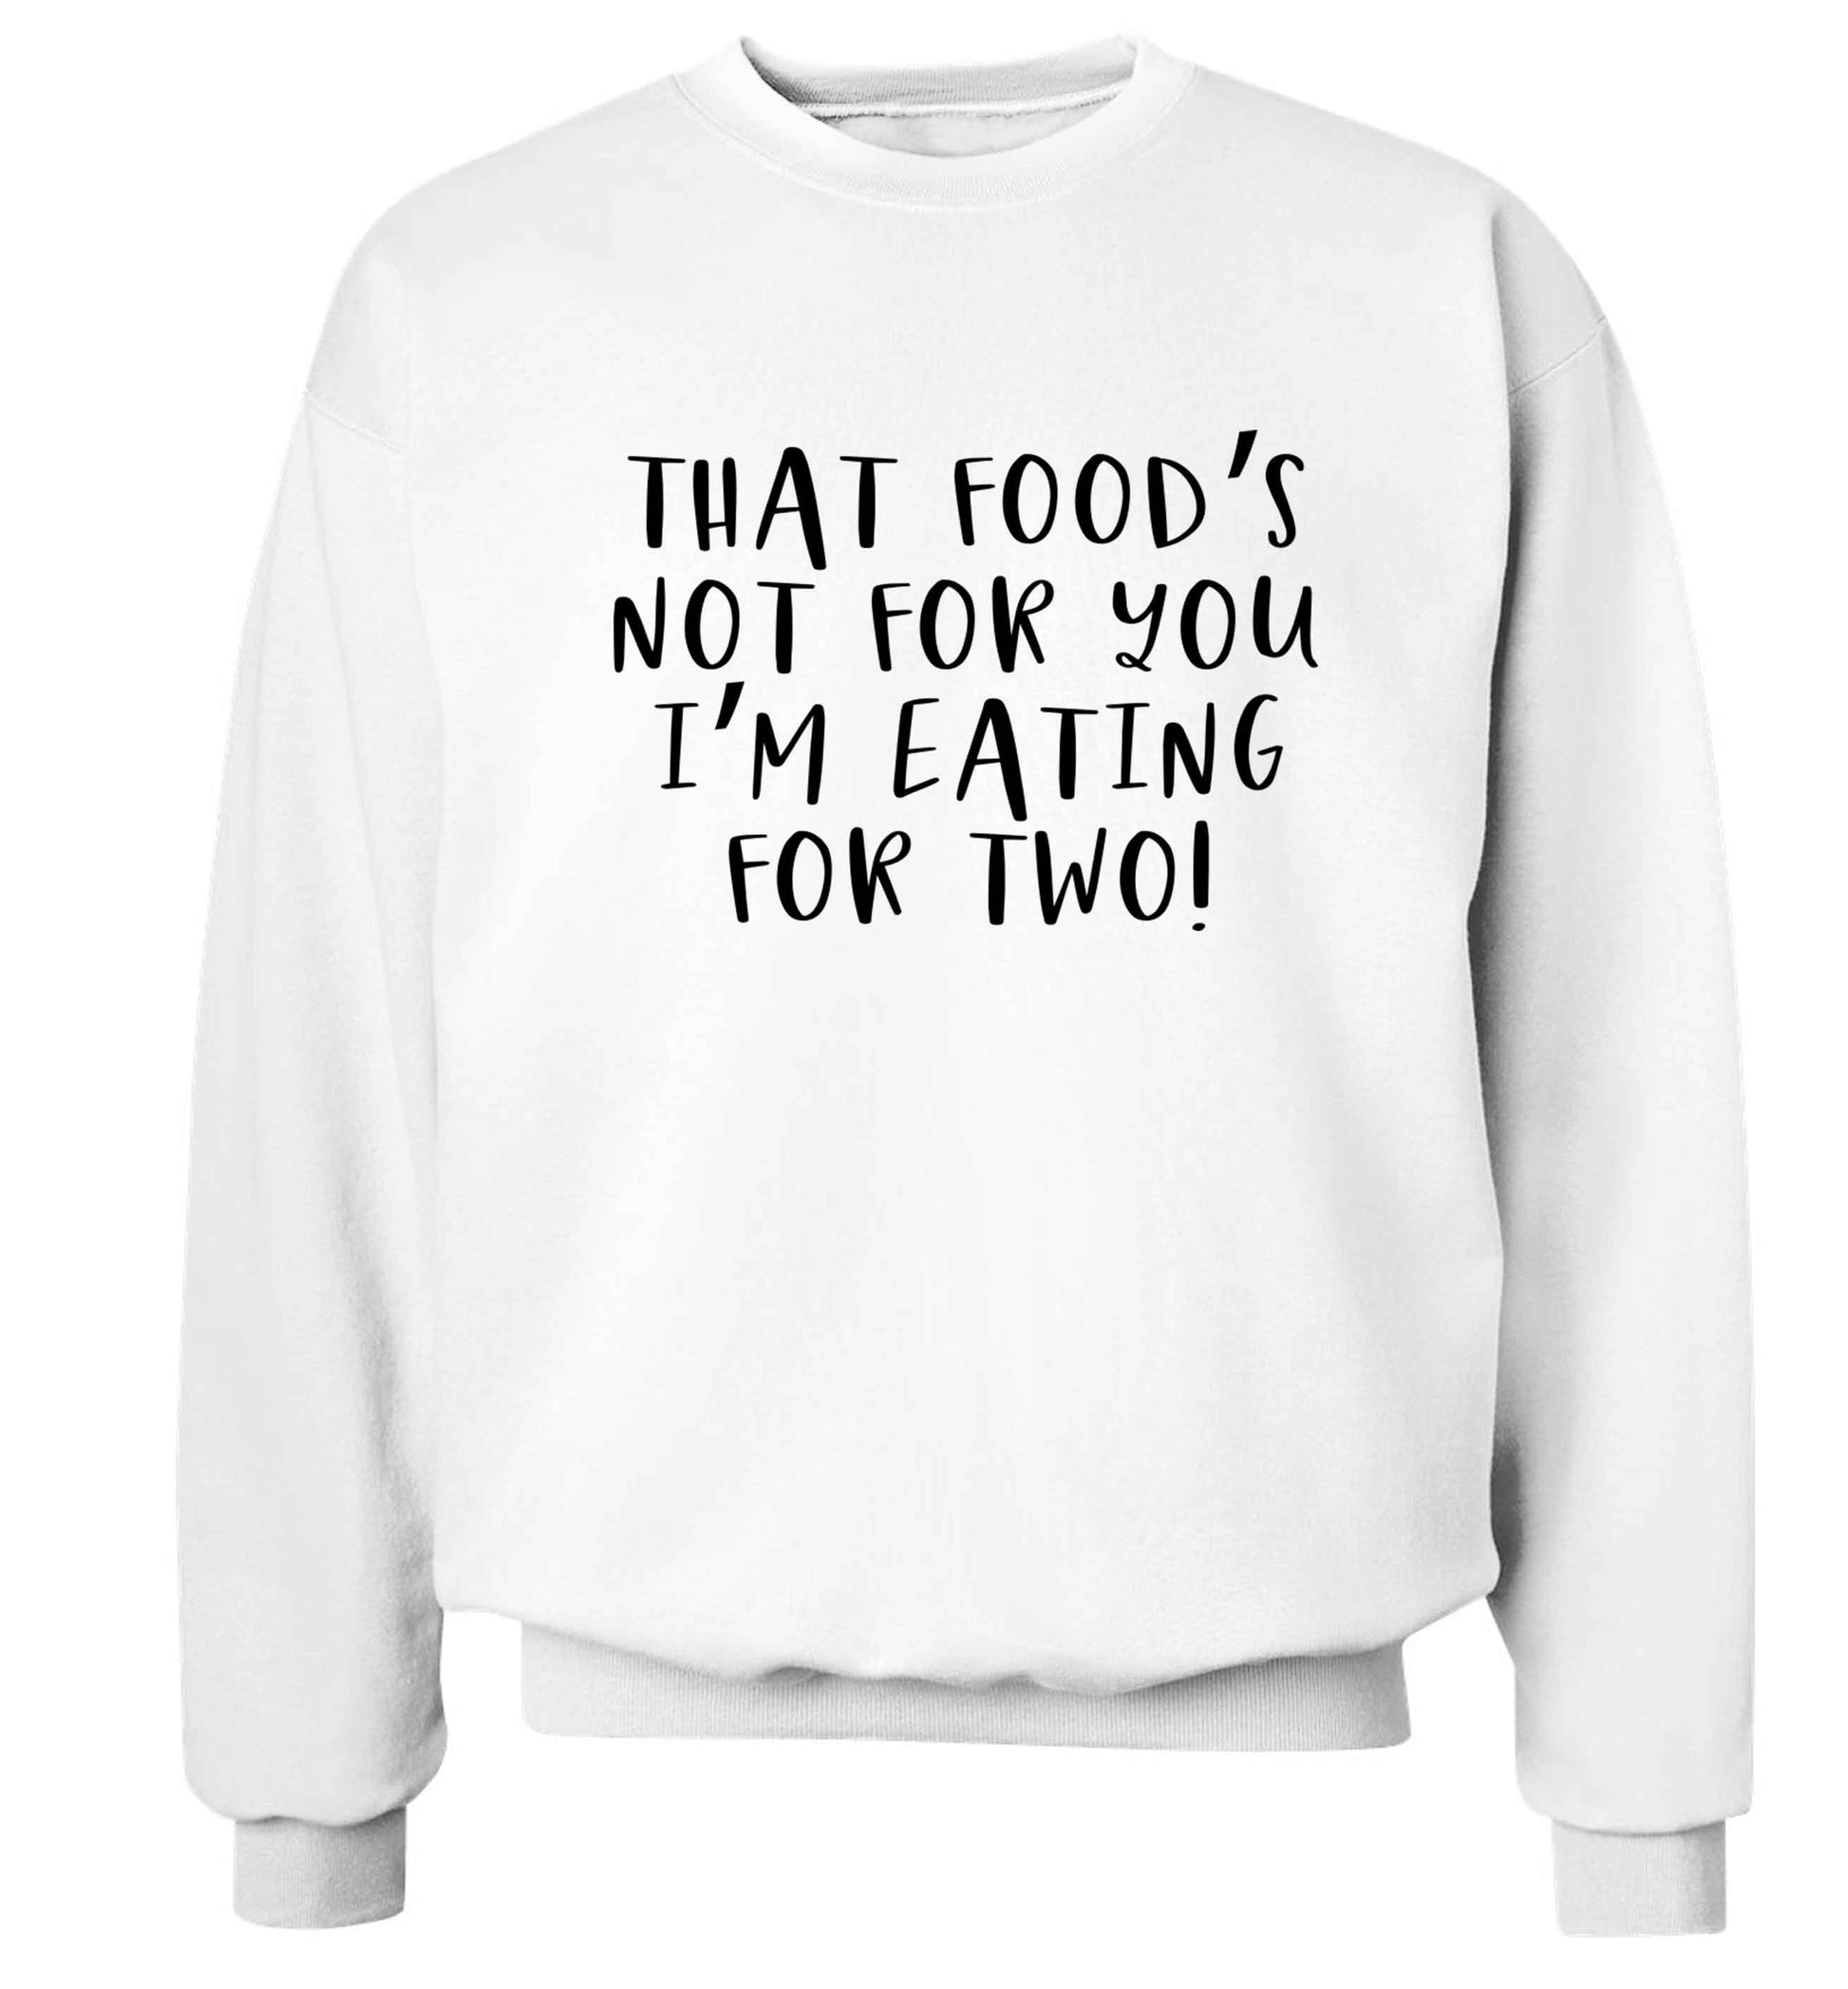 That food's not for you I'm eating for two Adult's unisex white Sweater 2XL